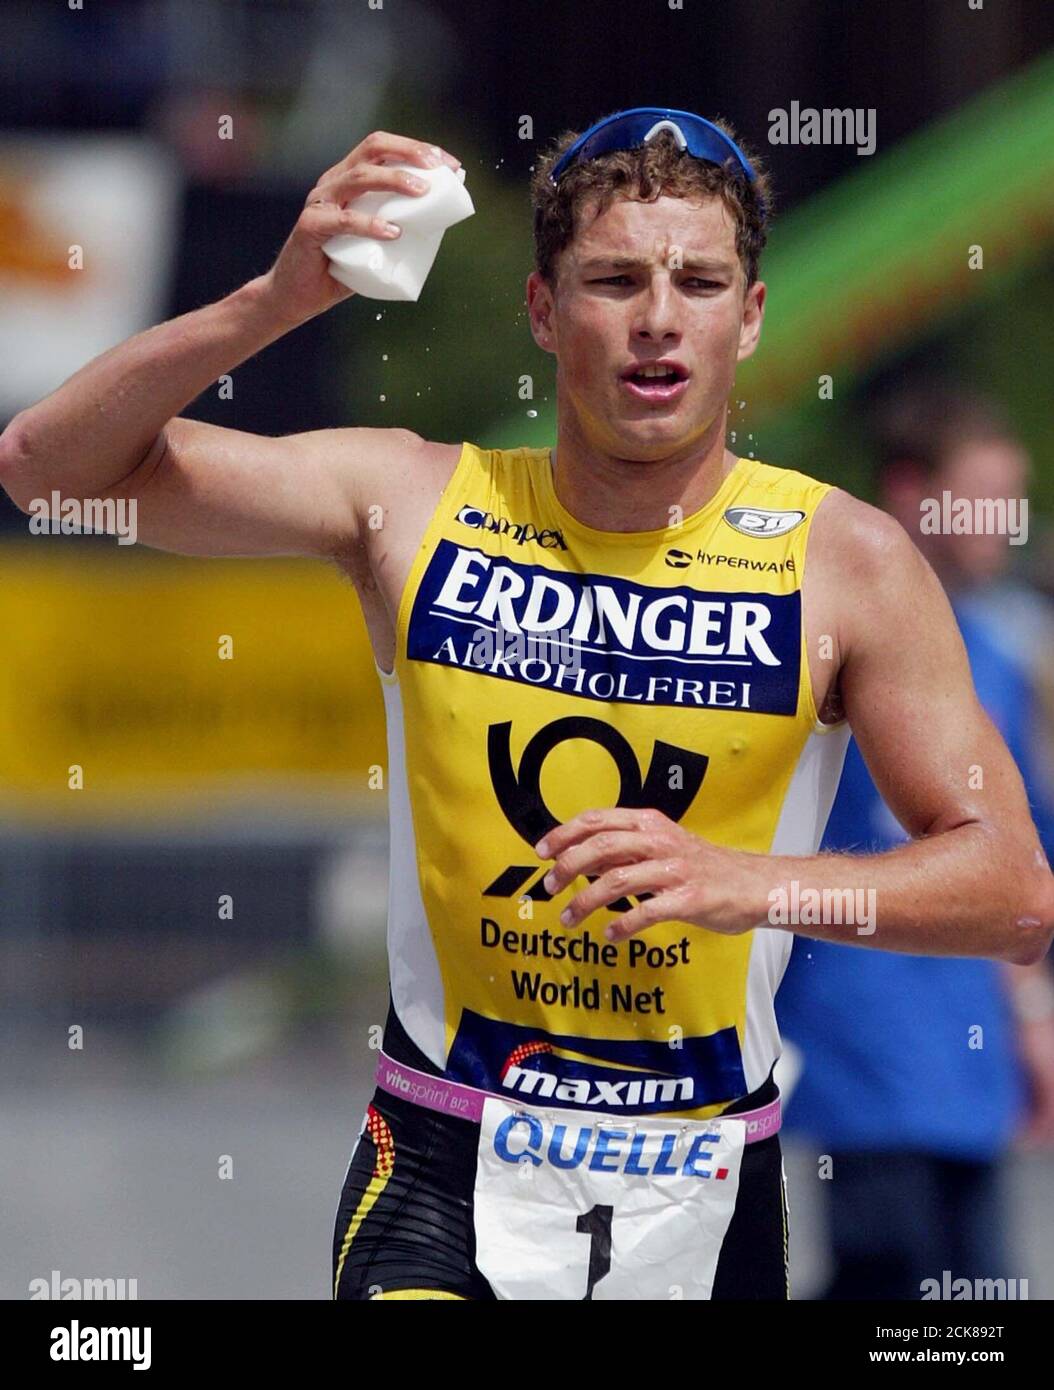 German triathlete Lothar Leder runs during the 42 km competition at the  Challenge triathlon in Roth, near Nuremberg, July 14, 2002. REUTERS/Michael  Dalder MAD Stock Photo - Alamy